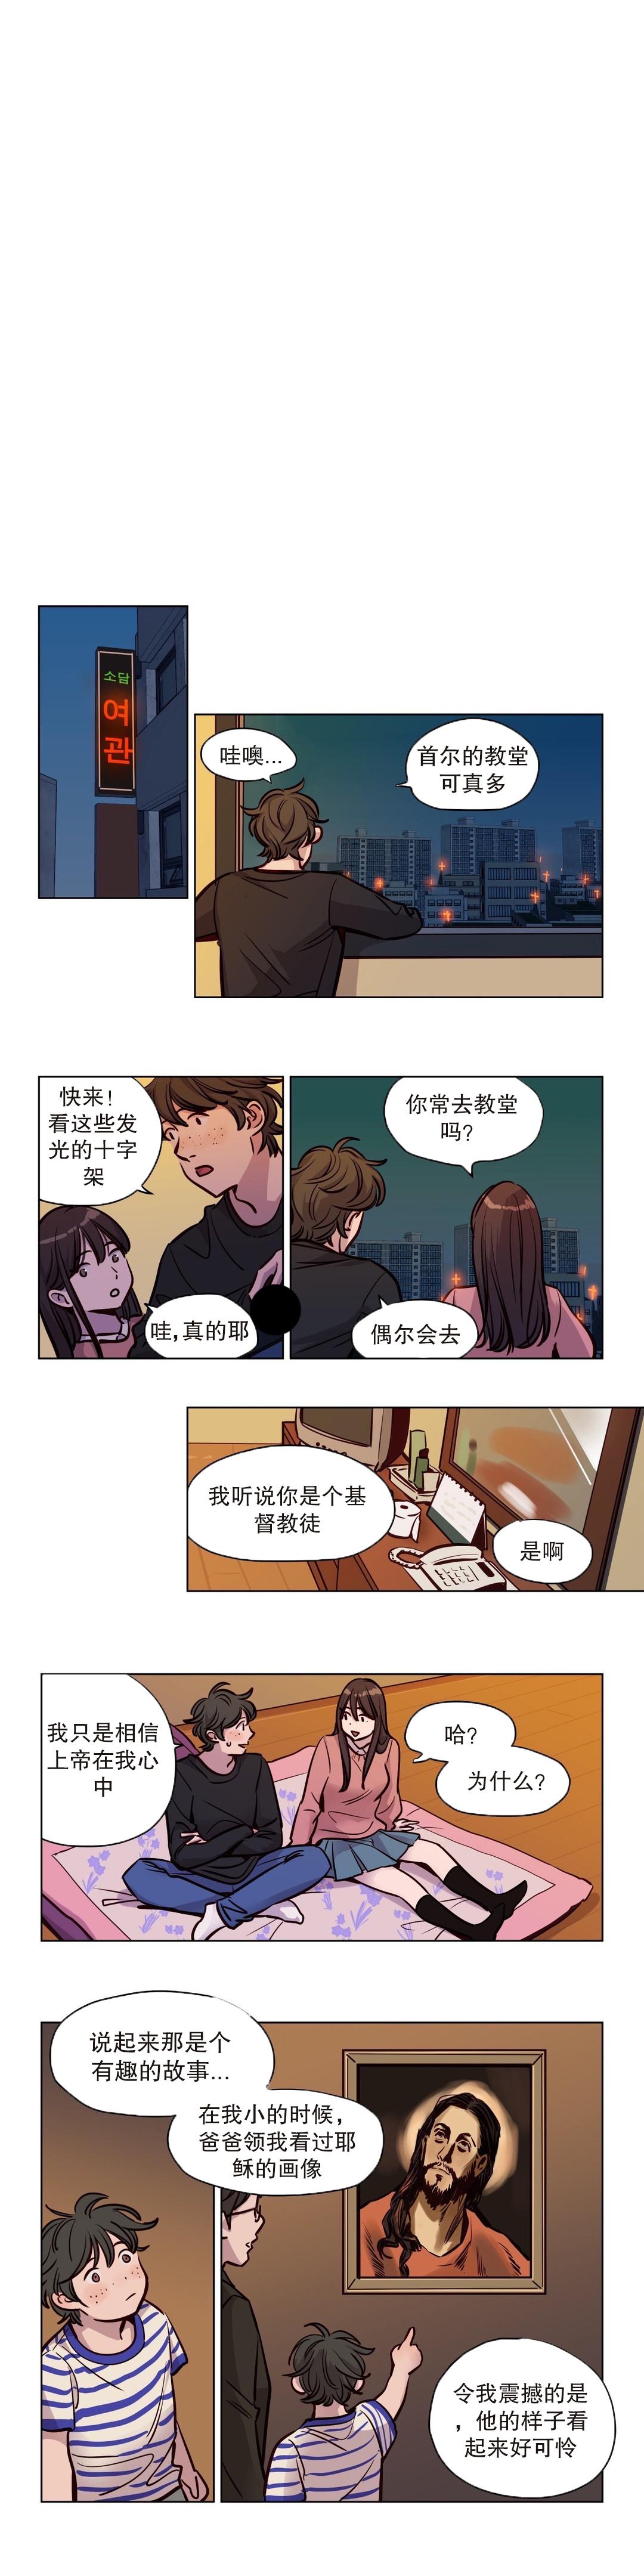 [Ramjak] 赎罪营(Atonement Camp) Ch.50-52 (Chinese) 27